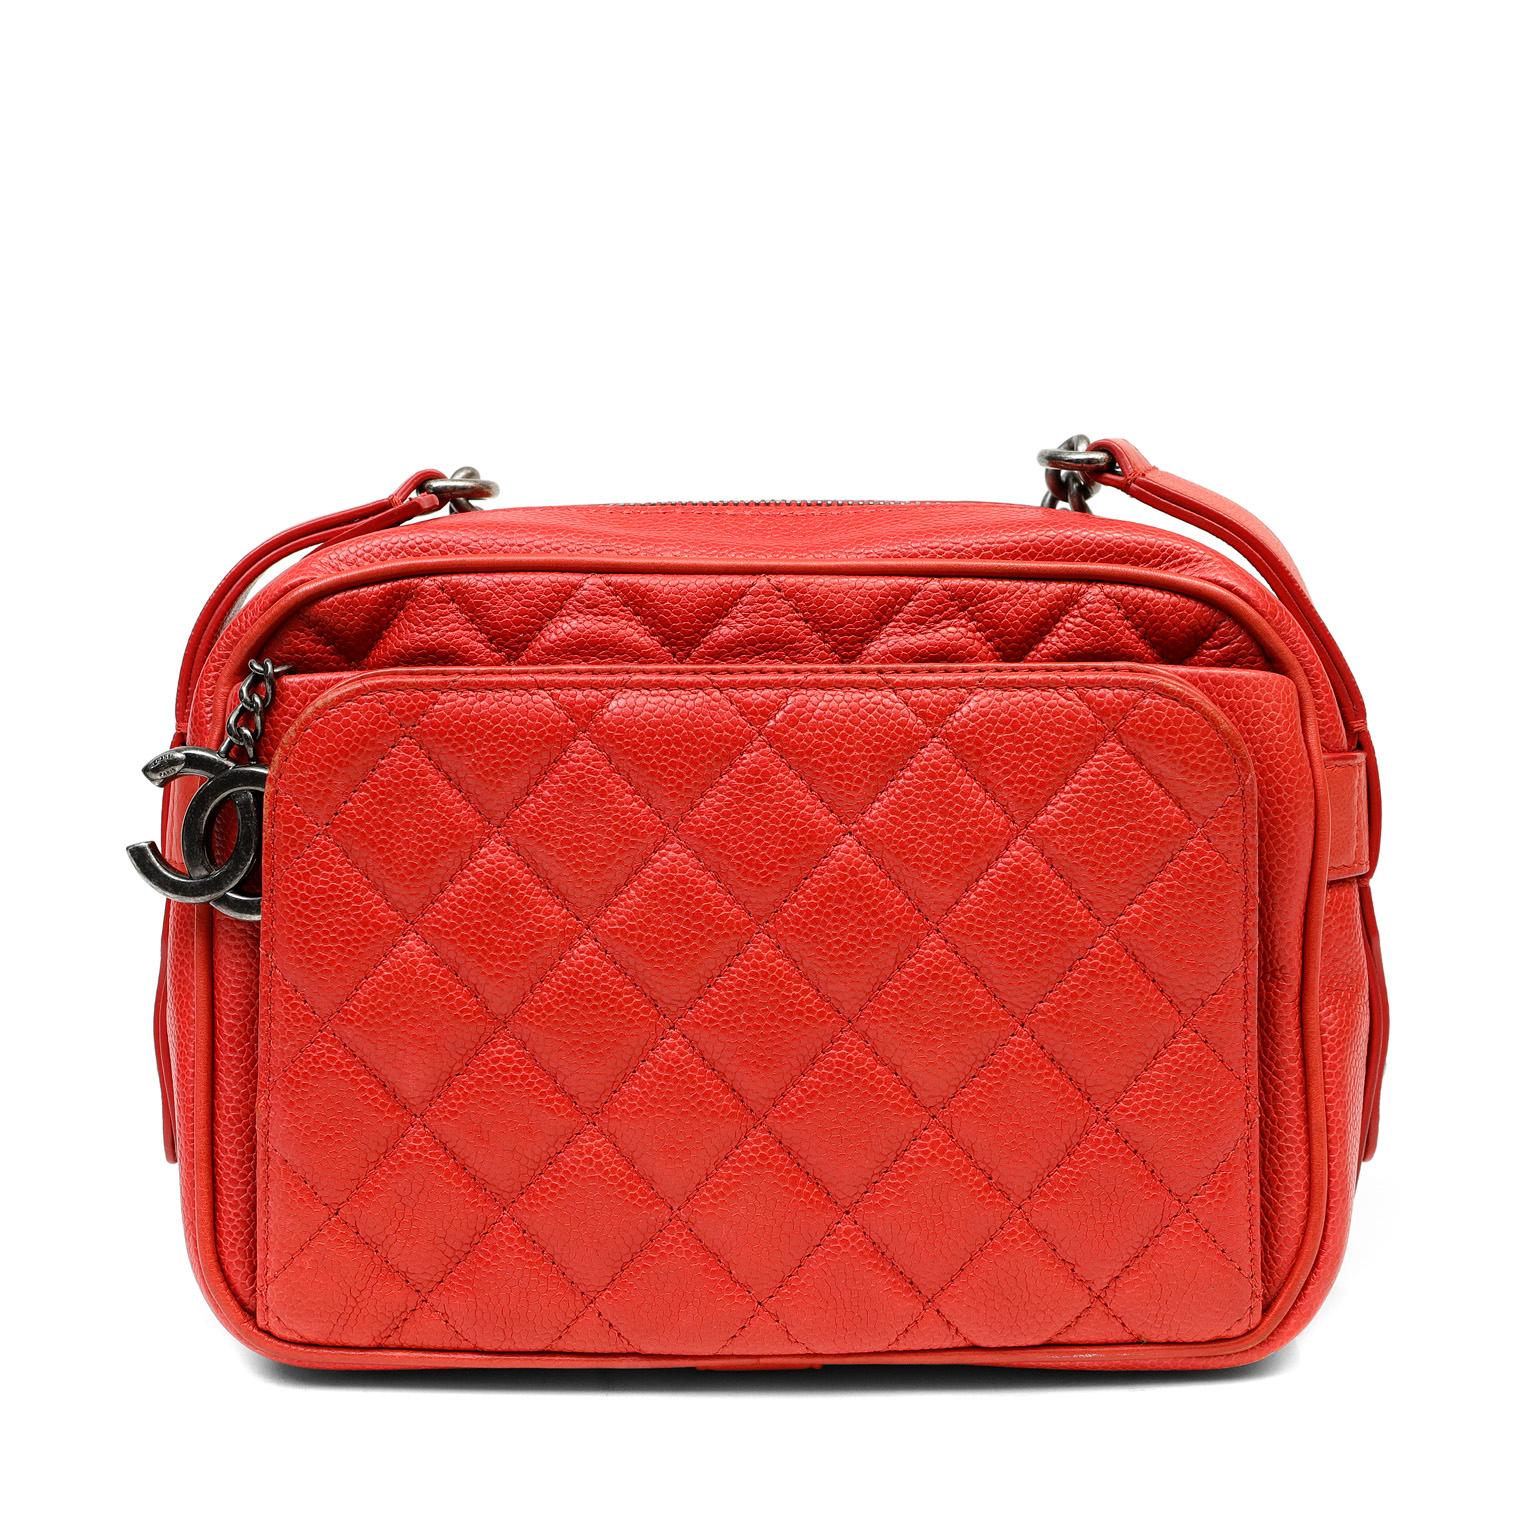 Chanel Red Caviar Leather Crossbody Bag In Good Condition For Sale In Palm Beach, FL